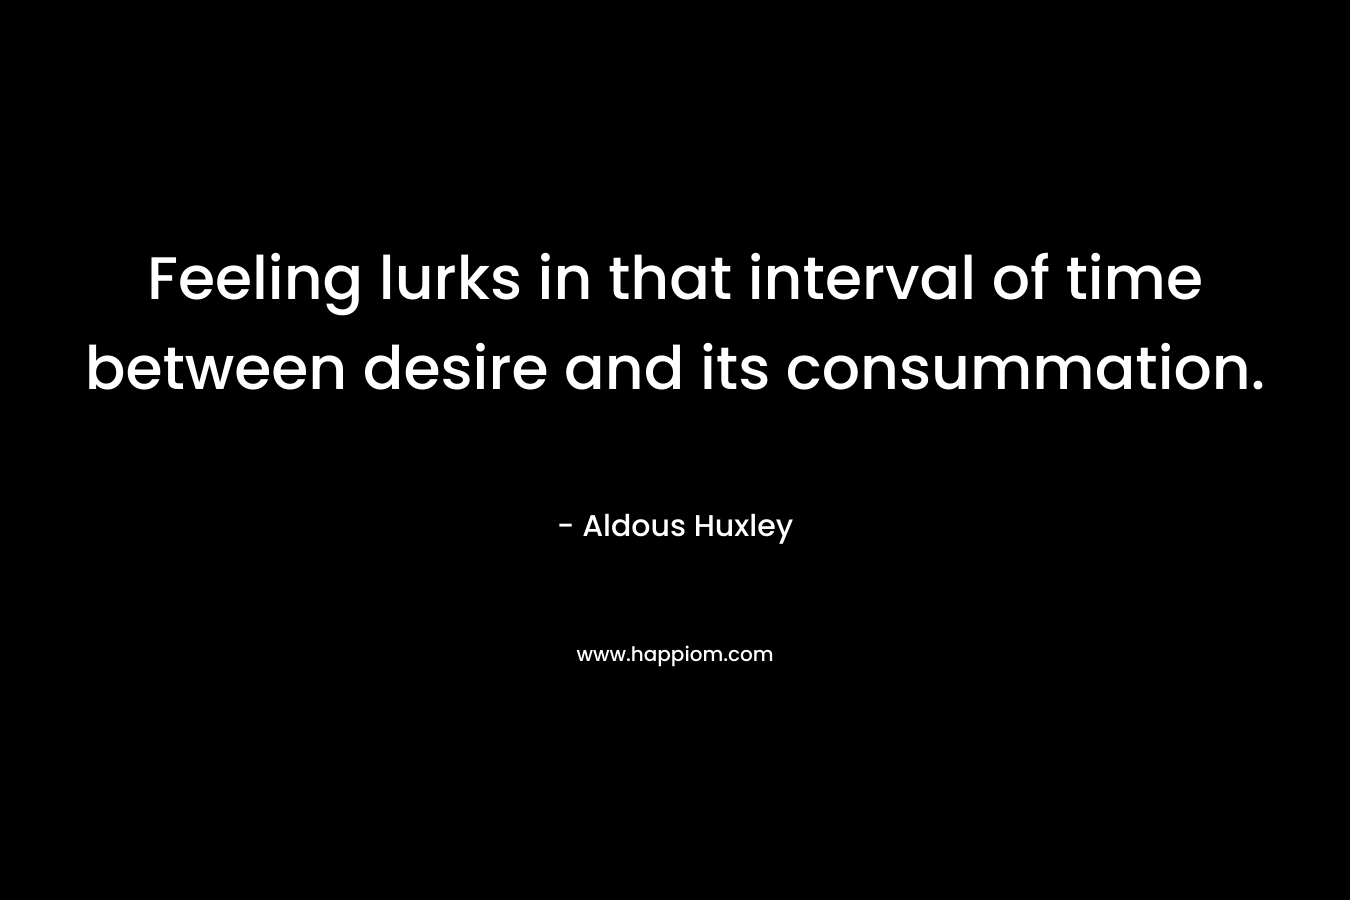 Feeling lurks in that interval of time between desire and its consummation. – Aldous Huxley